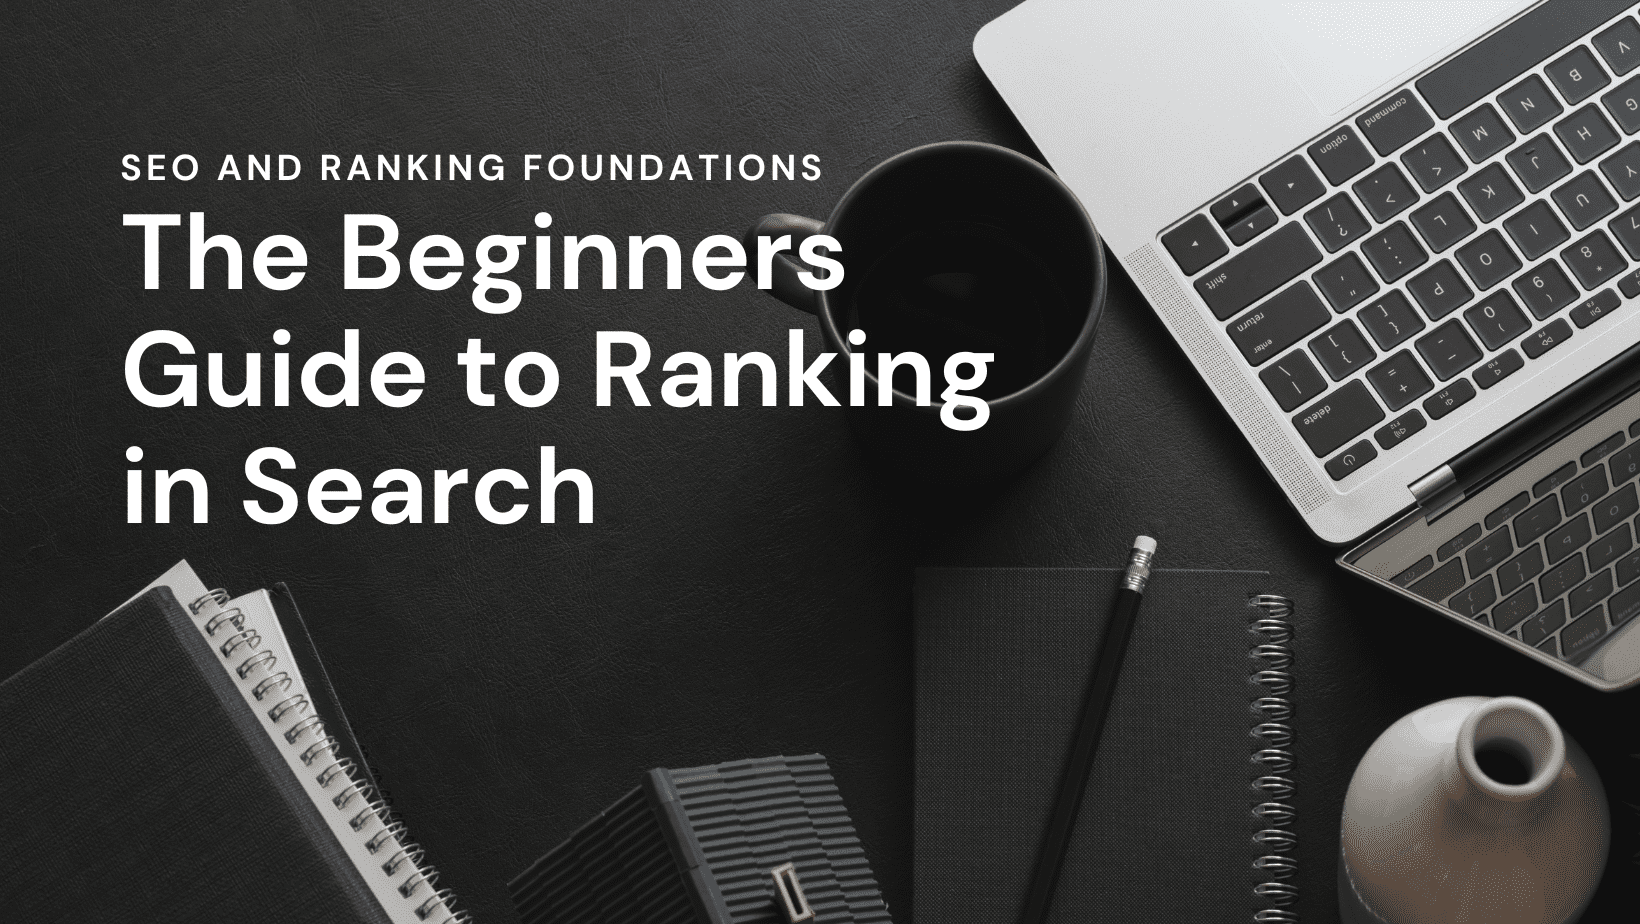 The Beginners Guide to Ranking in Search